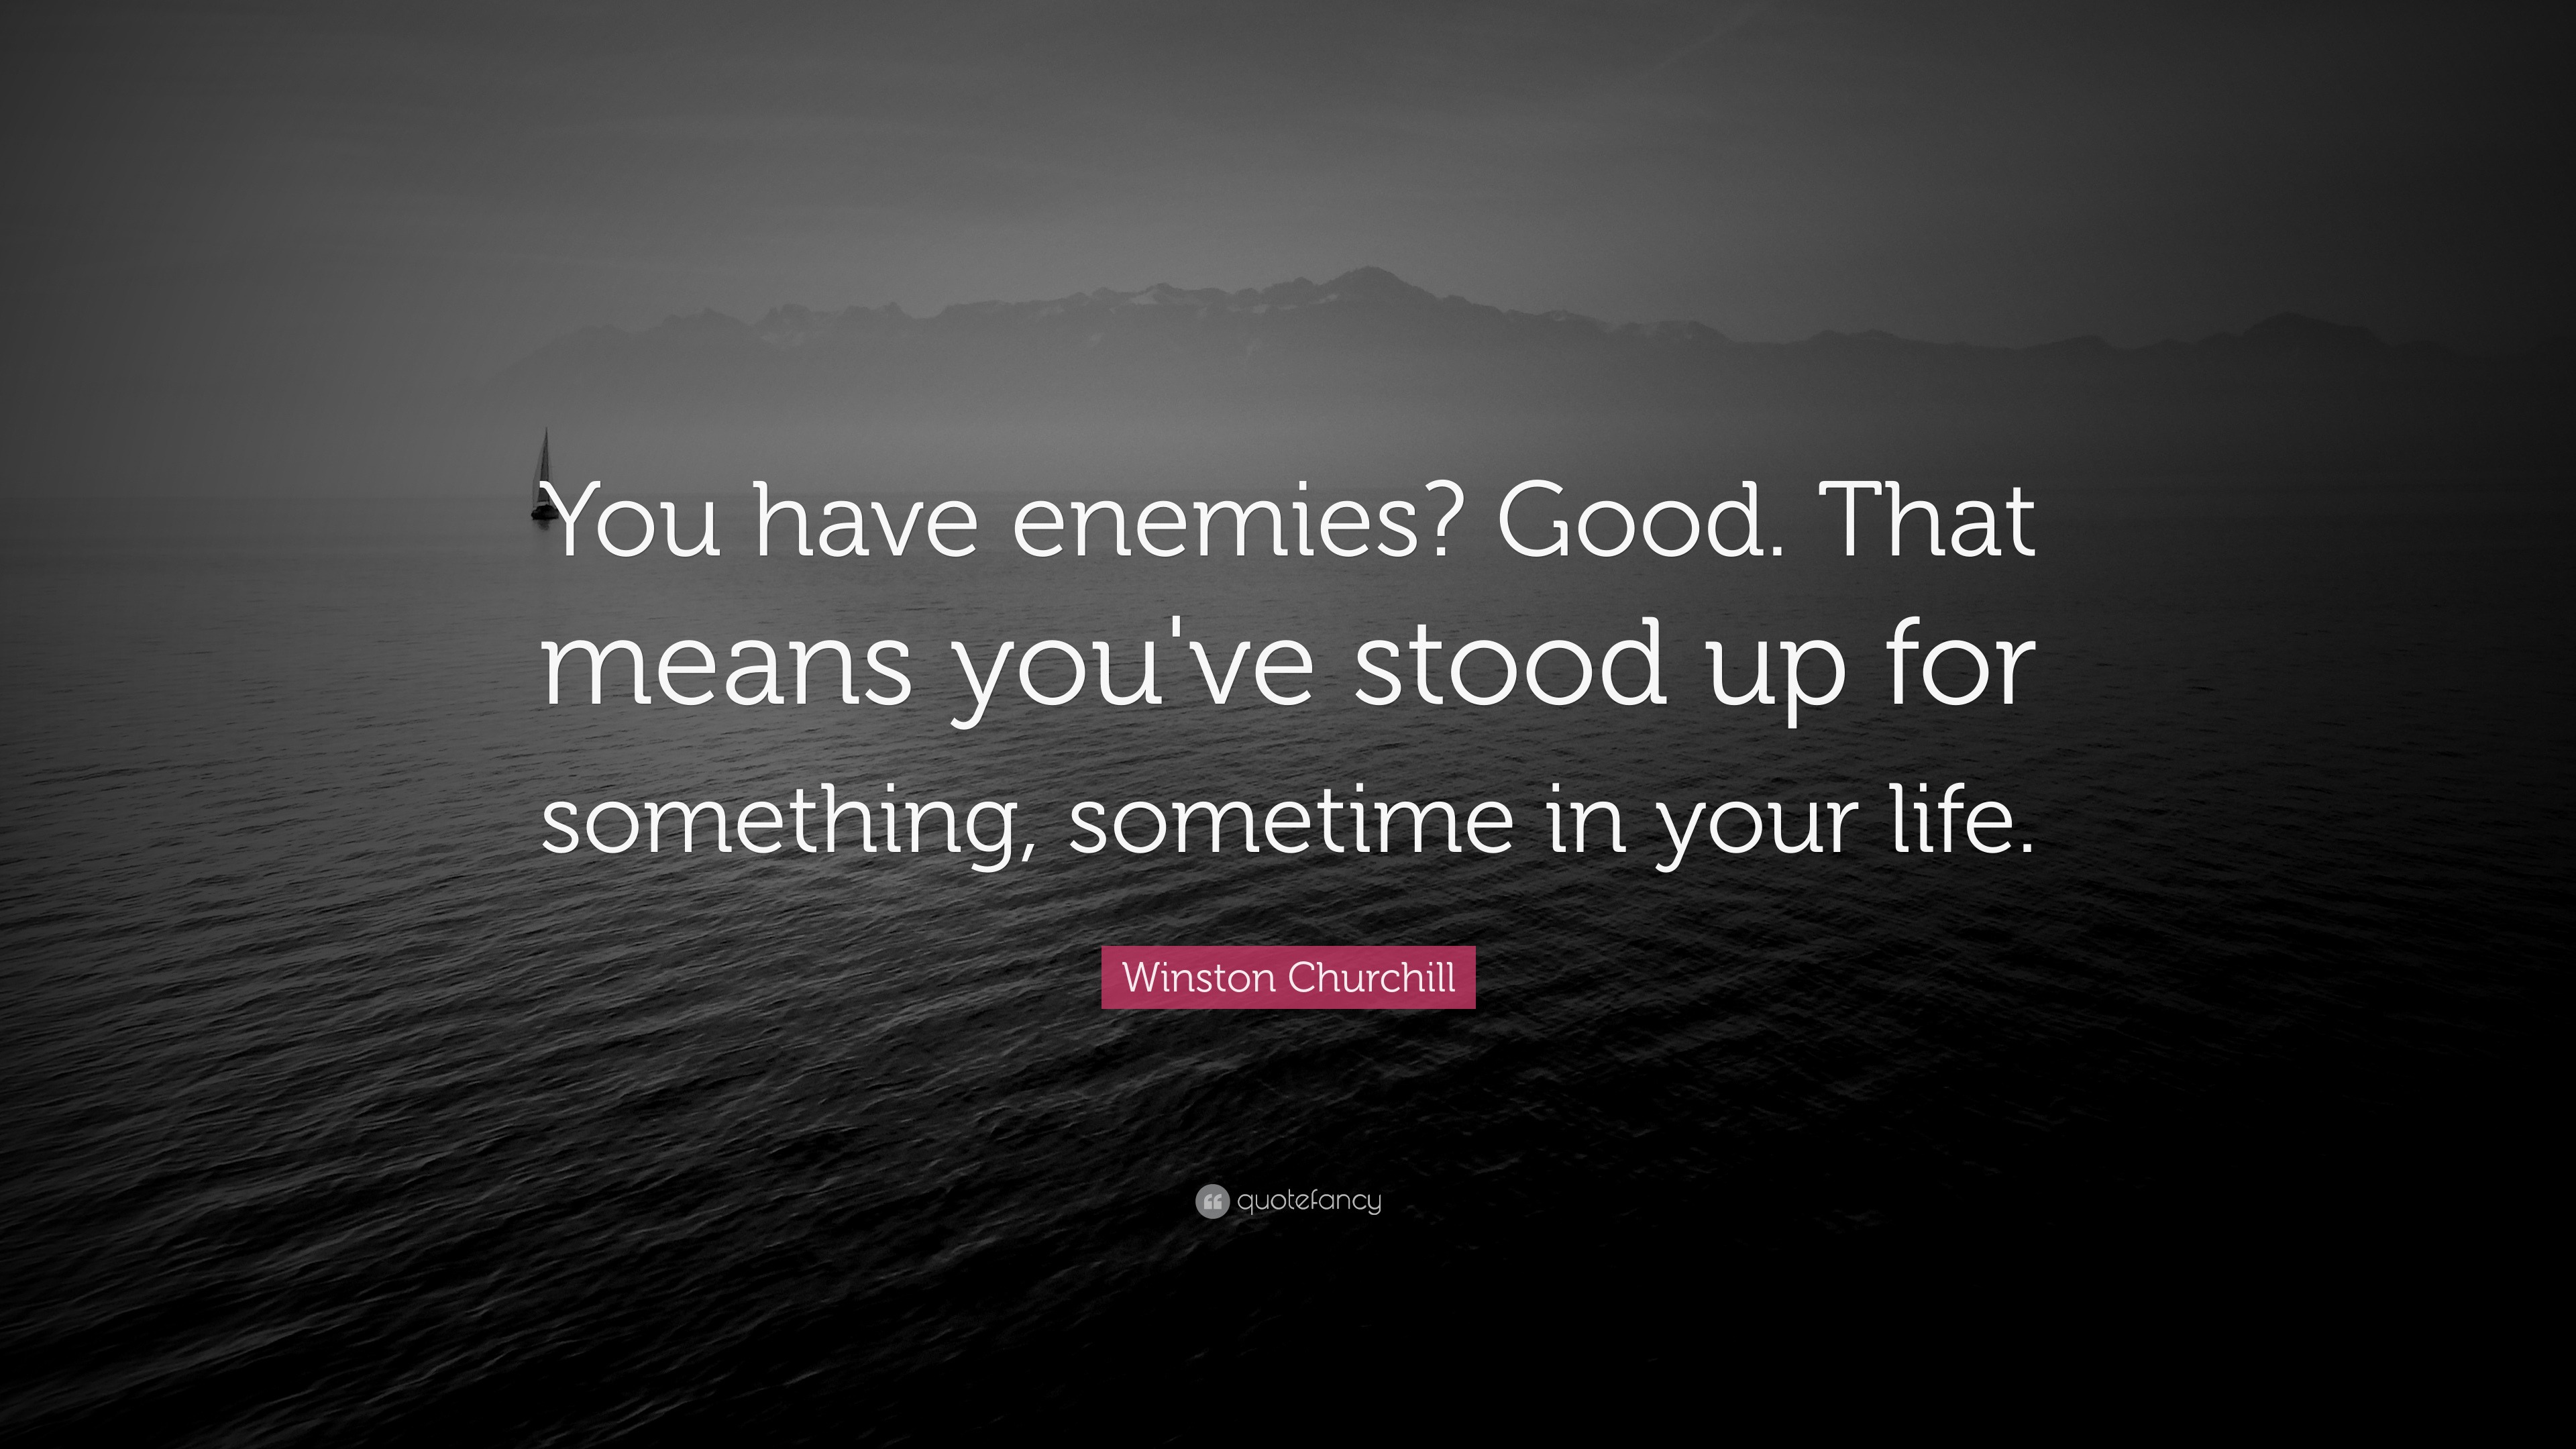 Winston Churchill Quote: “You have enemies? Good. That means you've